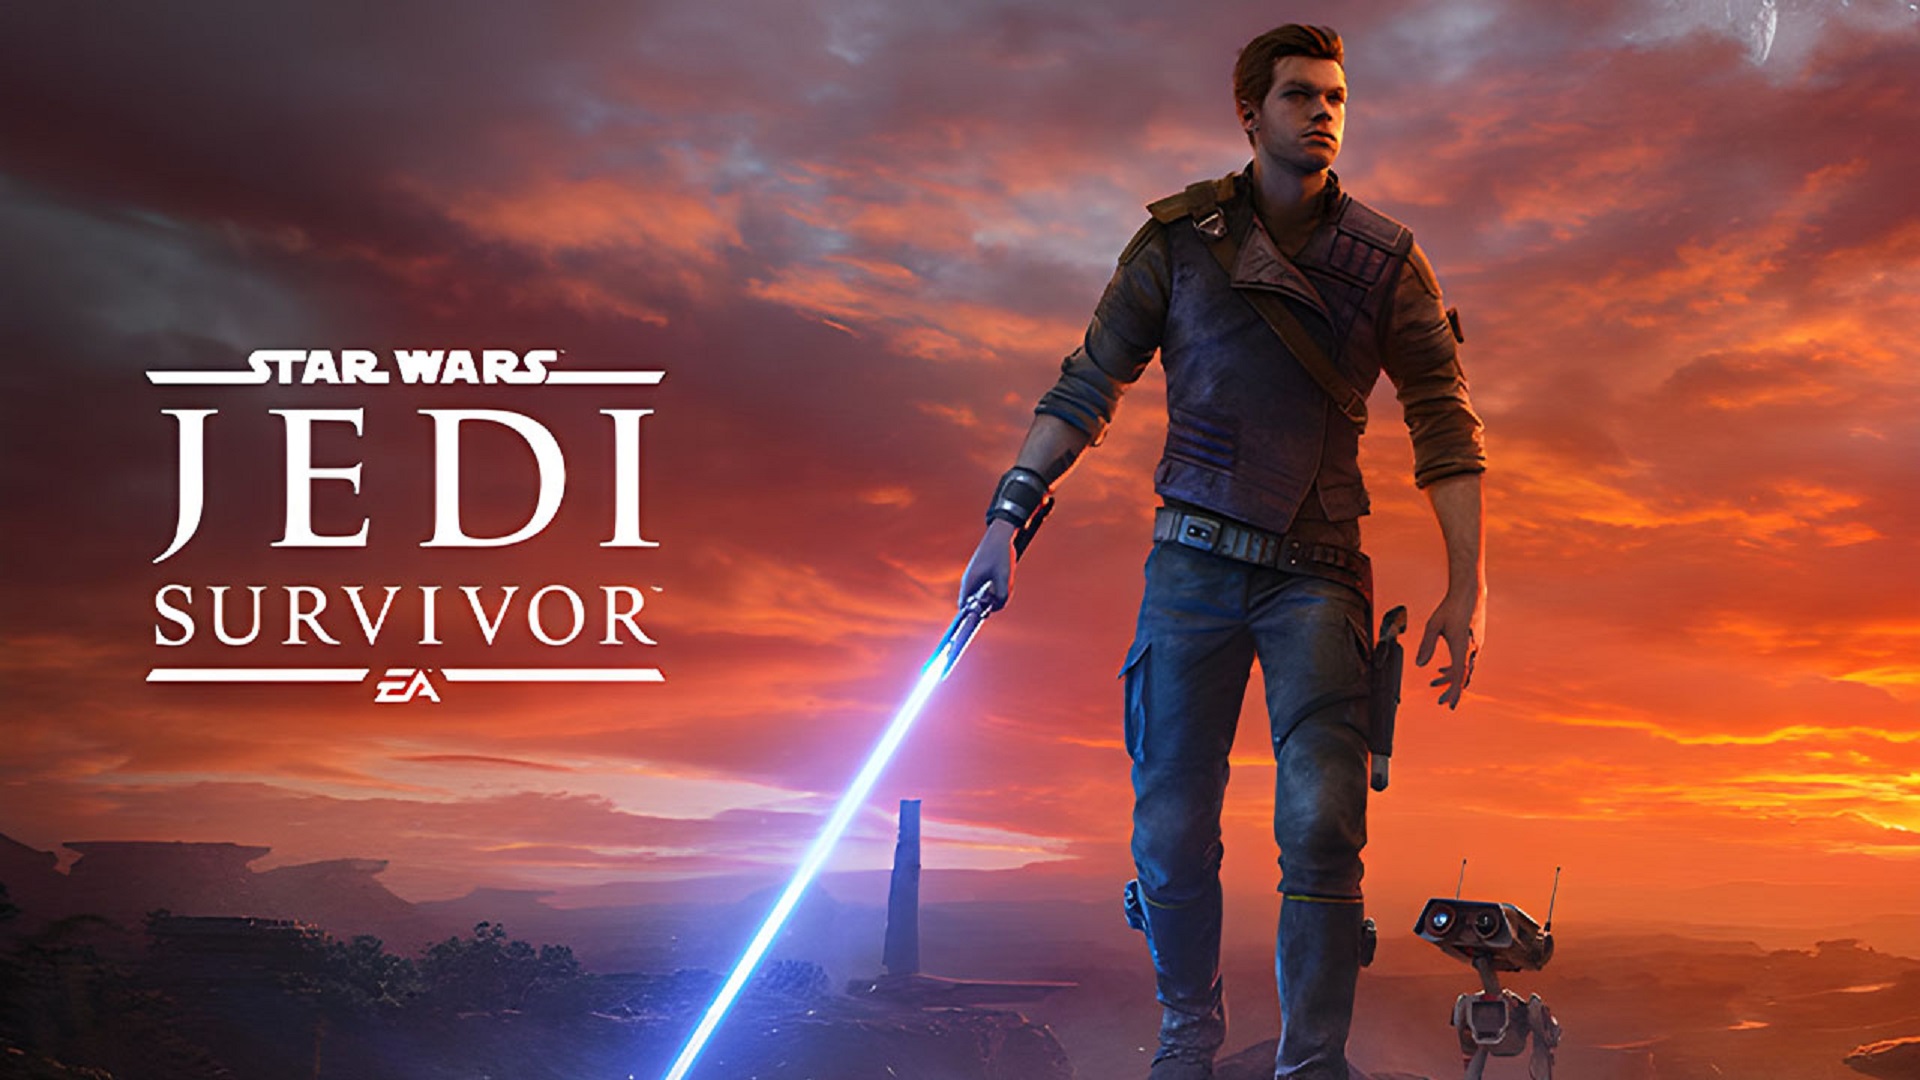 Star Wars Jedi: Survivor's PC File Size Is Approximately 155 GB, System Requirements Revealed